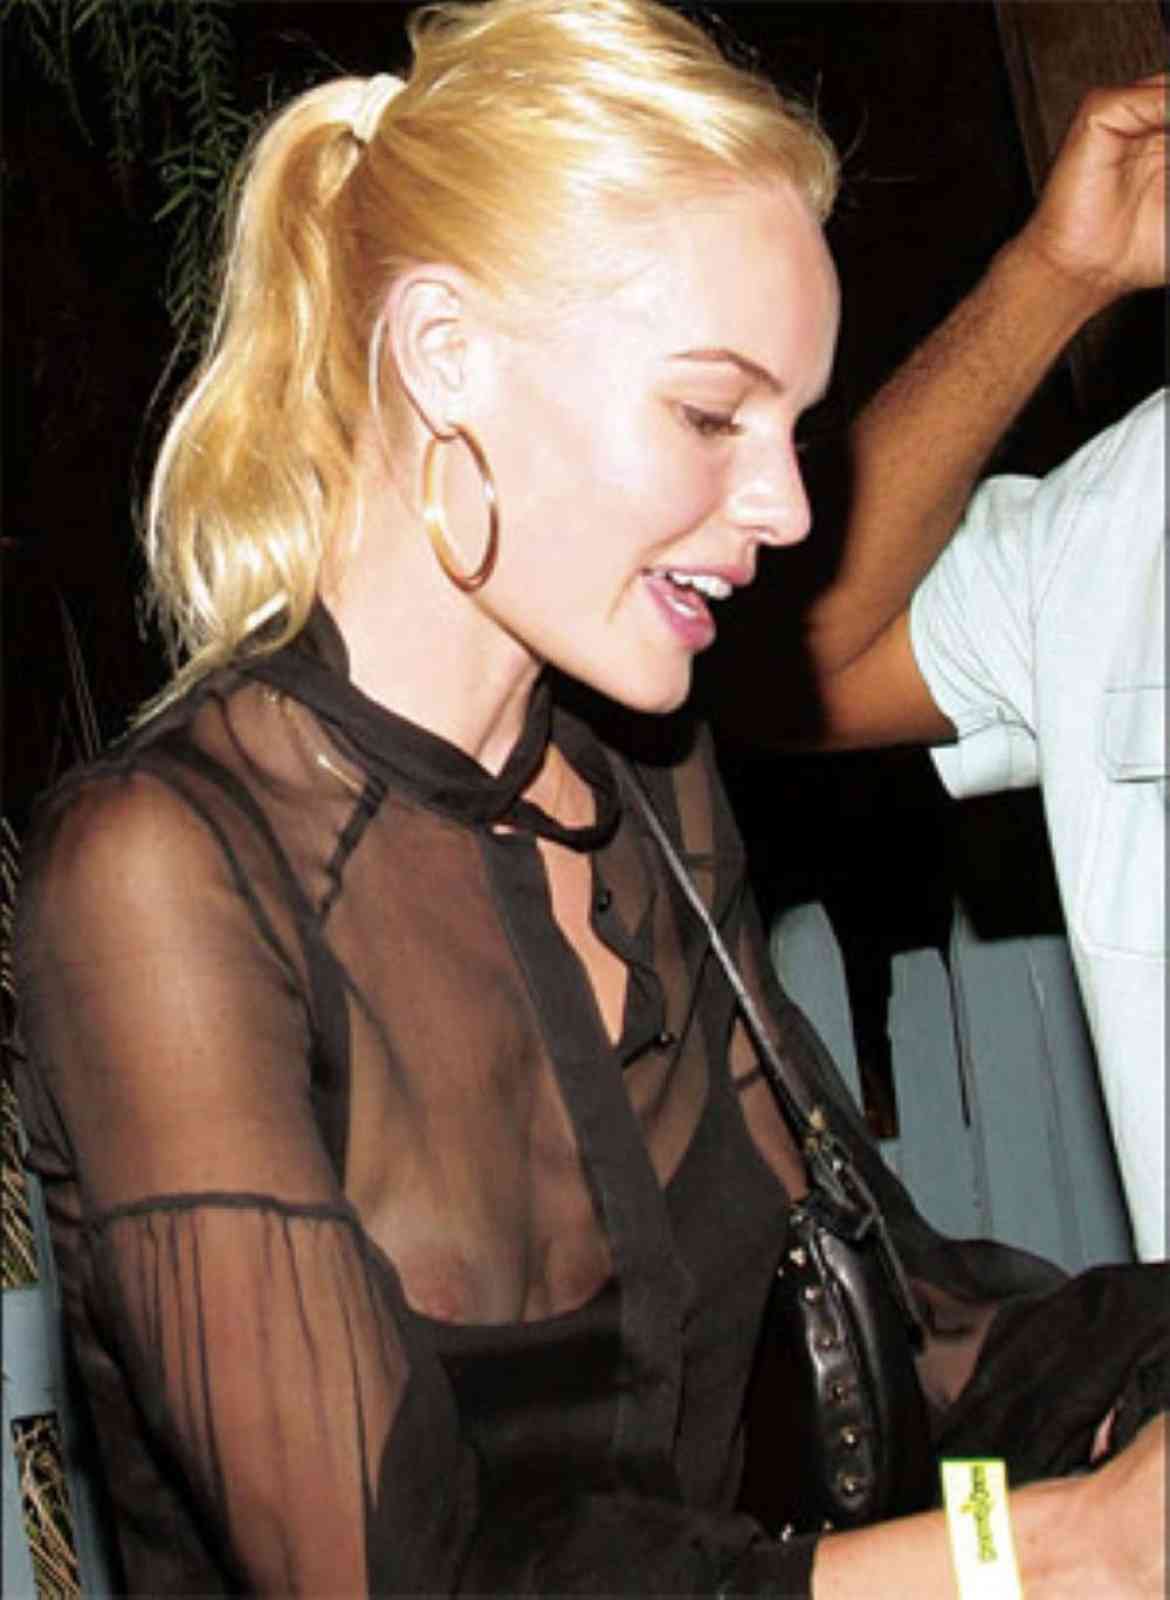 Kate Bosworth Porn - Kate Bosworth Nude Pictures. Rating = 7.93/10